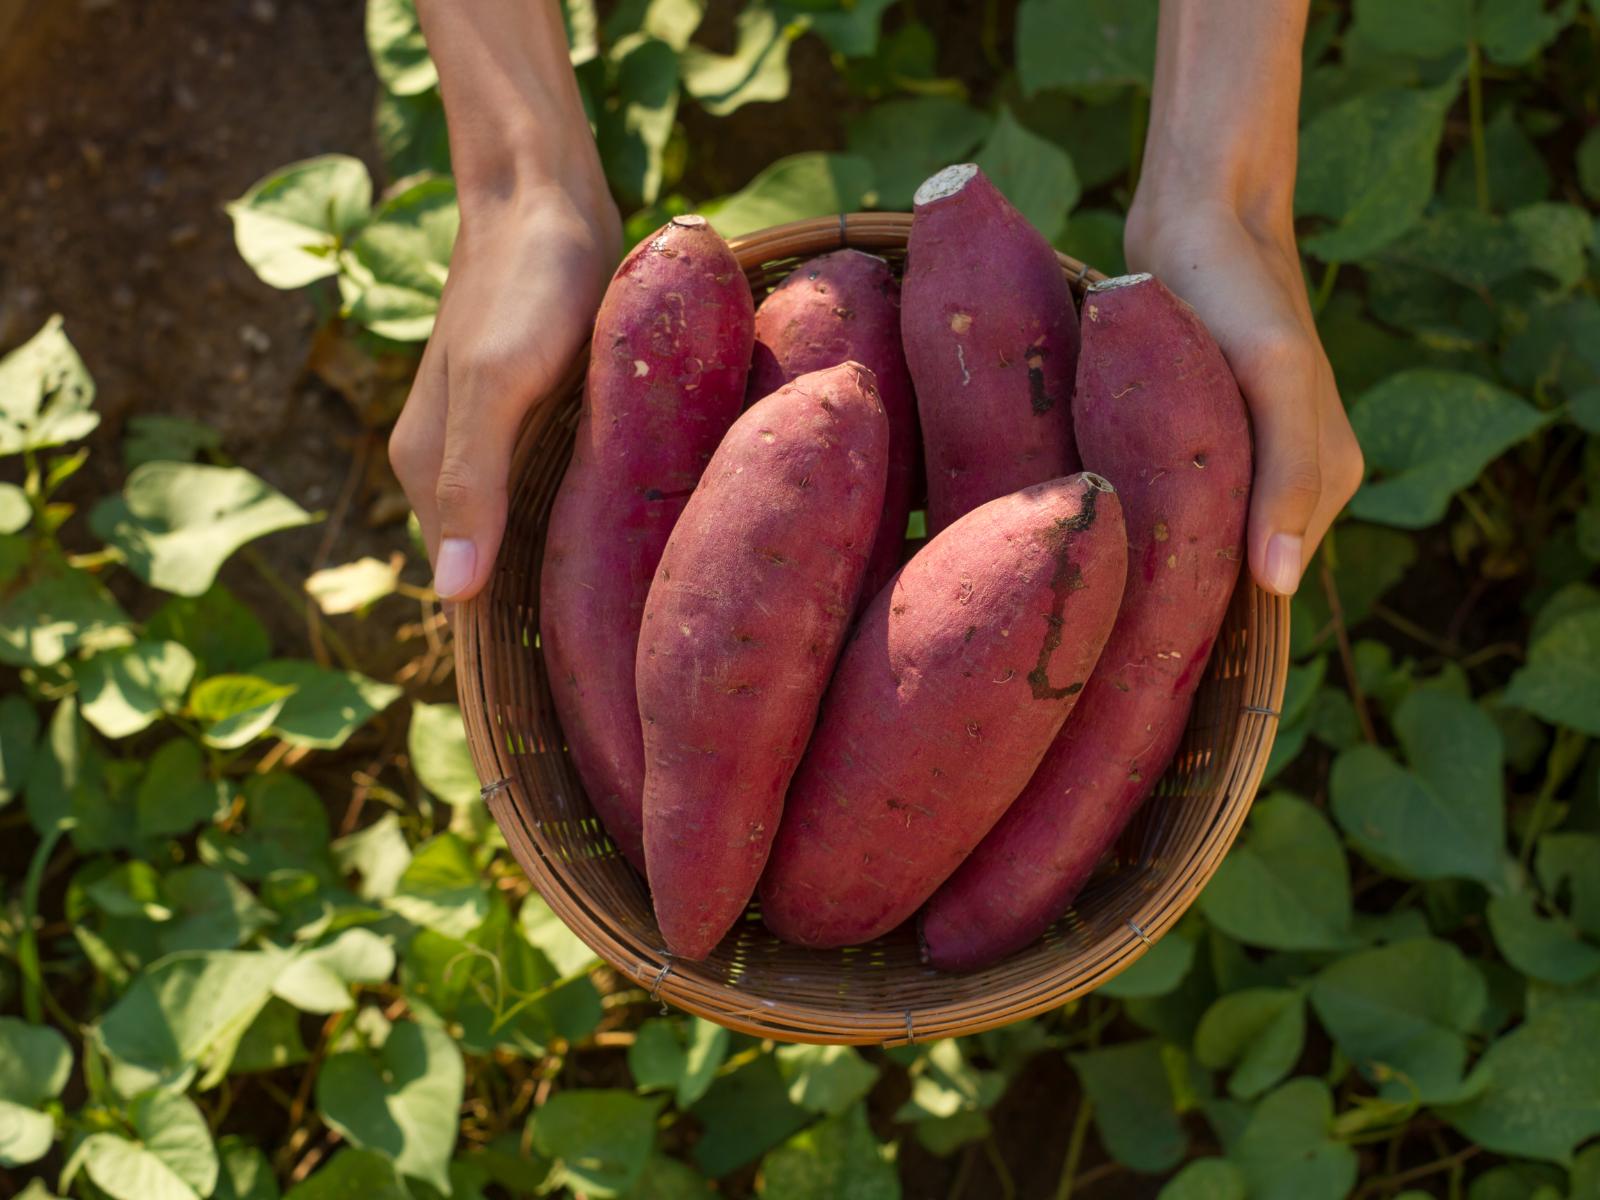 person holding a basket of sweet potatoes outside in a garden